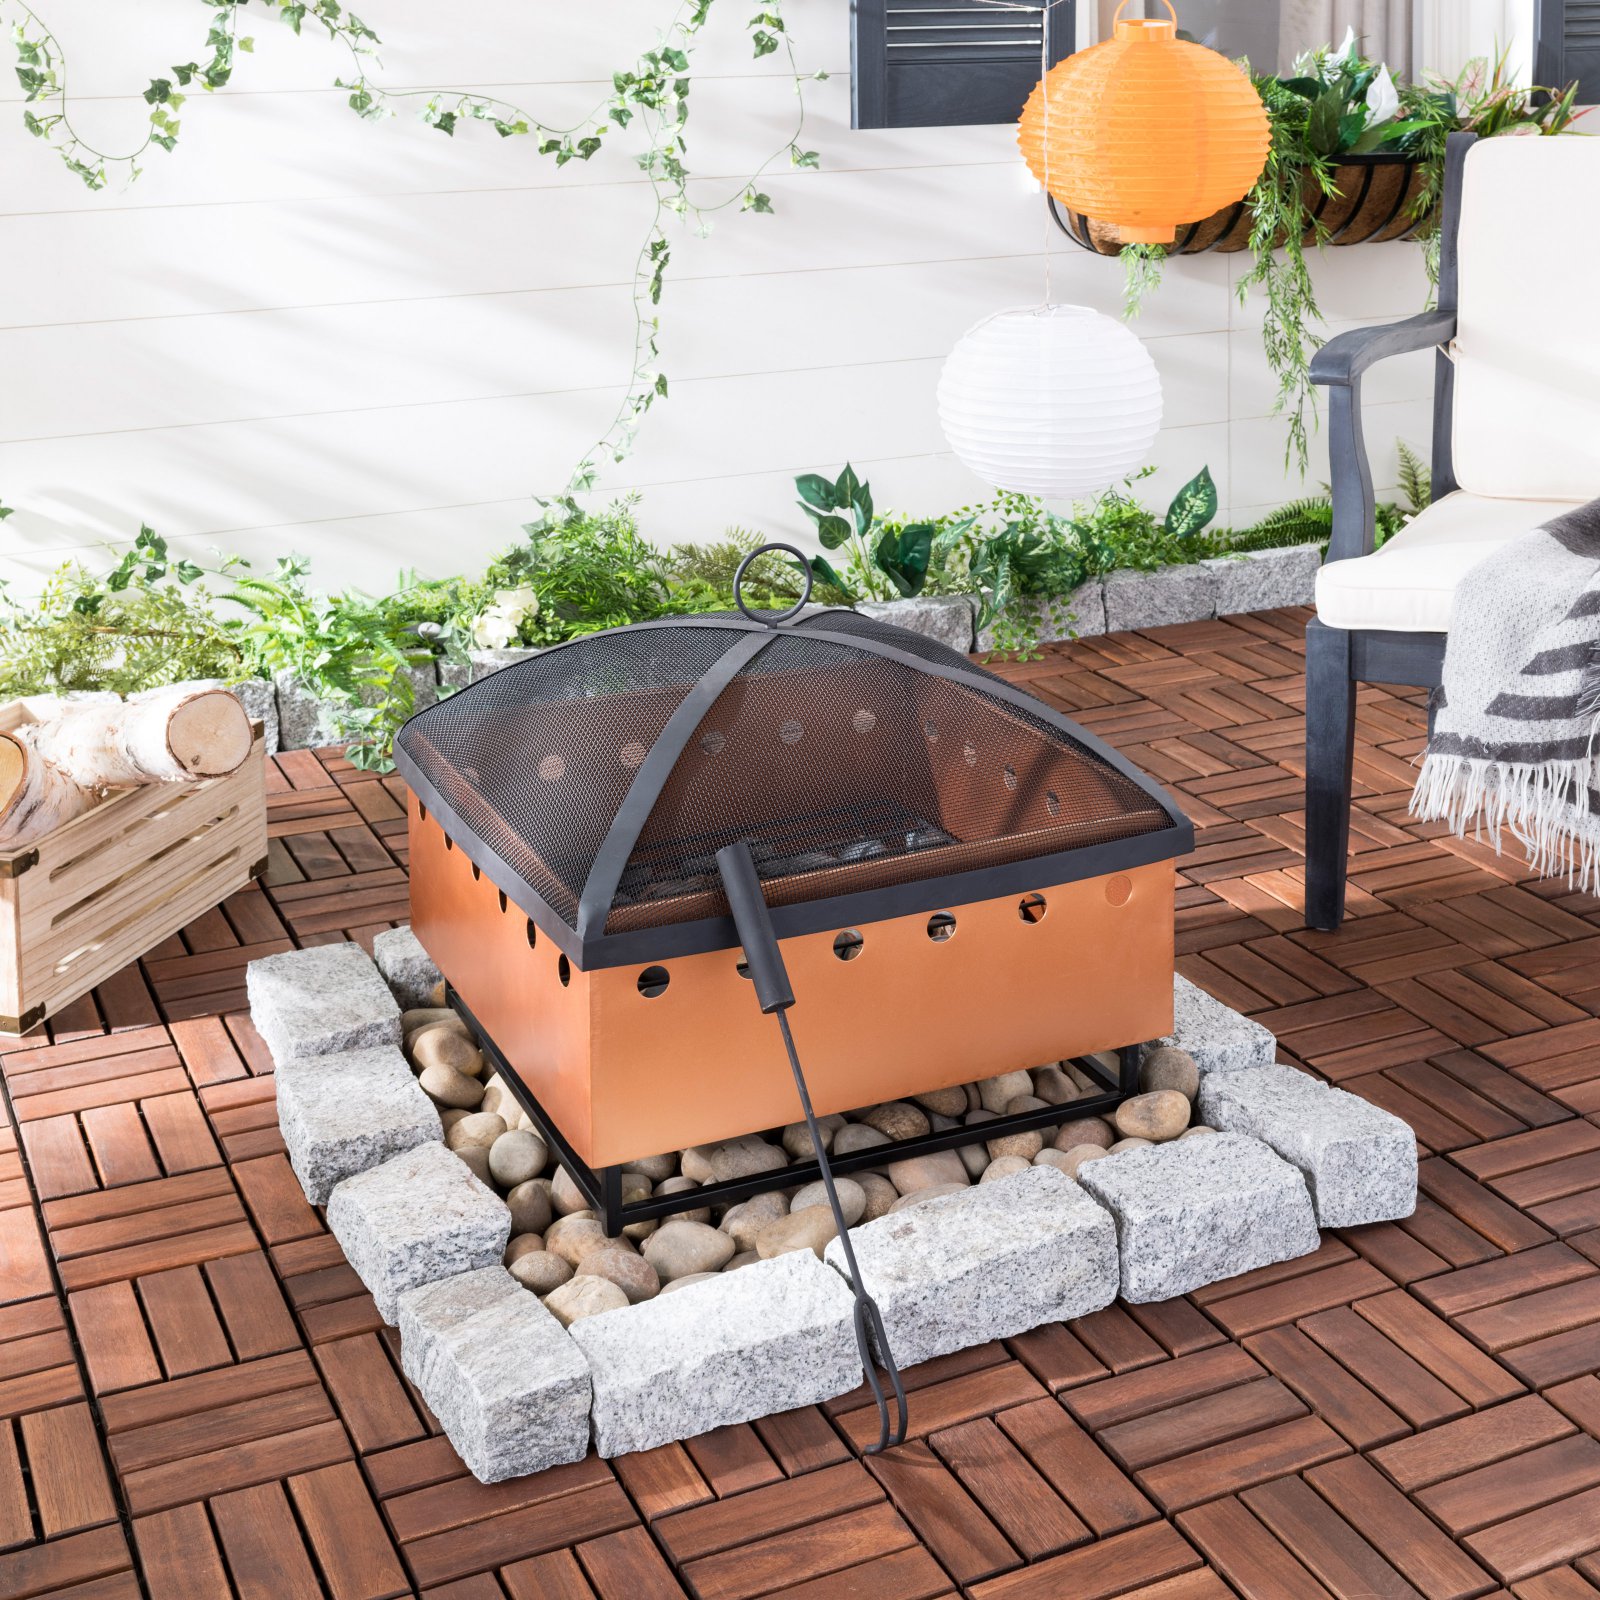 Safavieh Wyatt Outdoor Contemporary Square Fire Pit with Cover